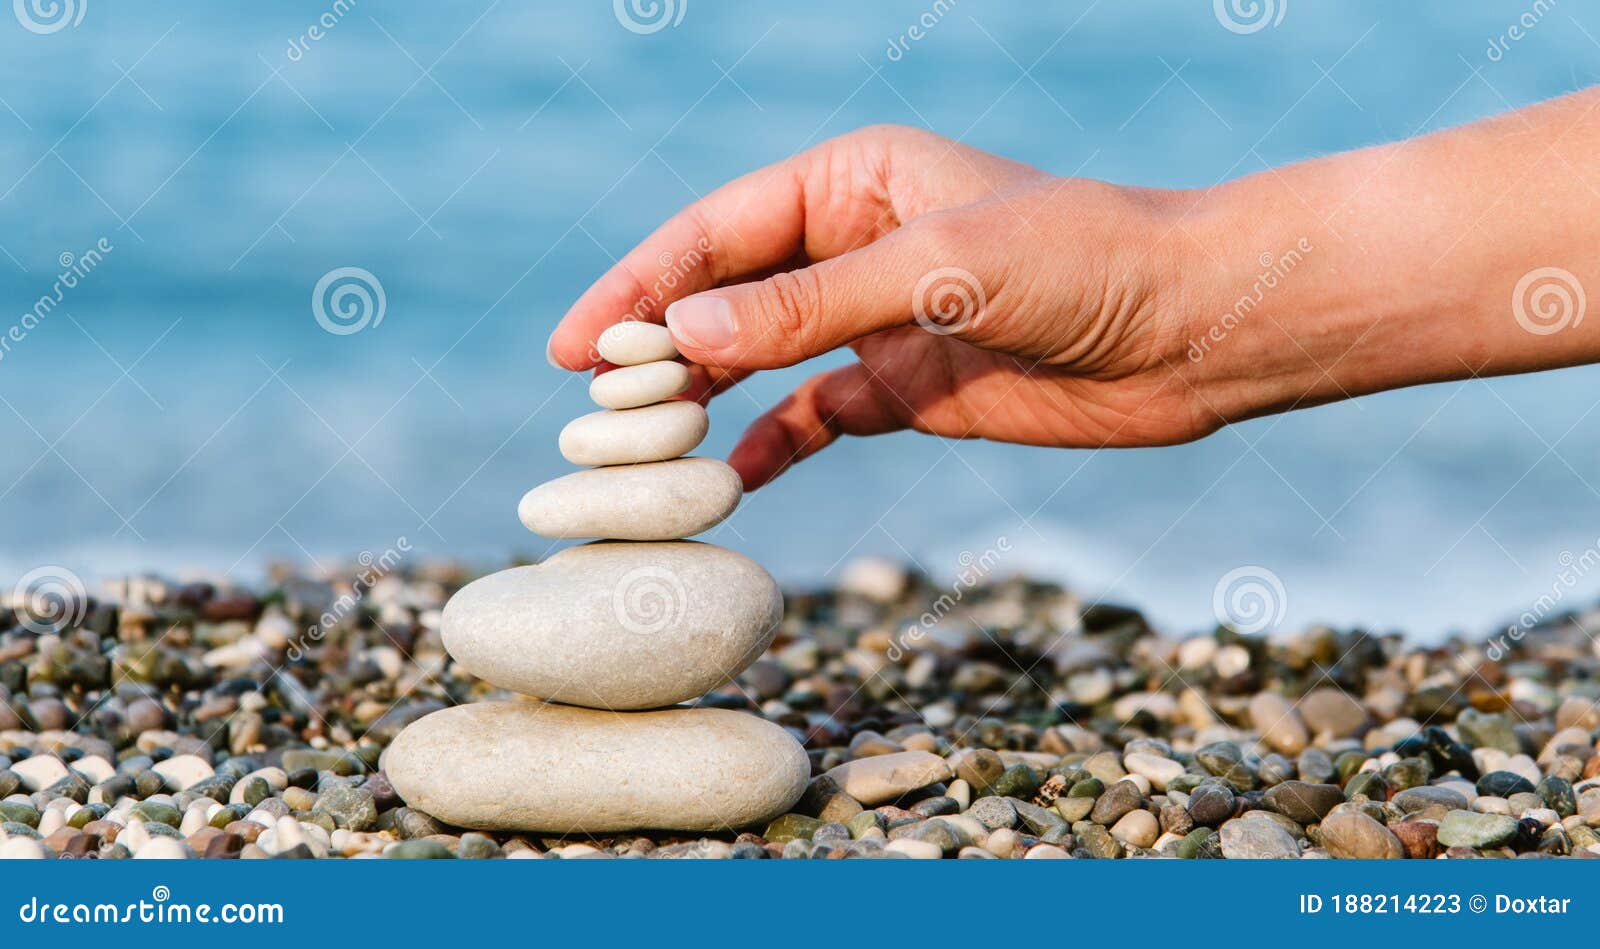 26 Man's Hand Picking Stones Images, Stock Photos, 3D objects